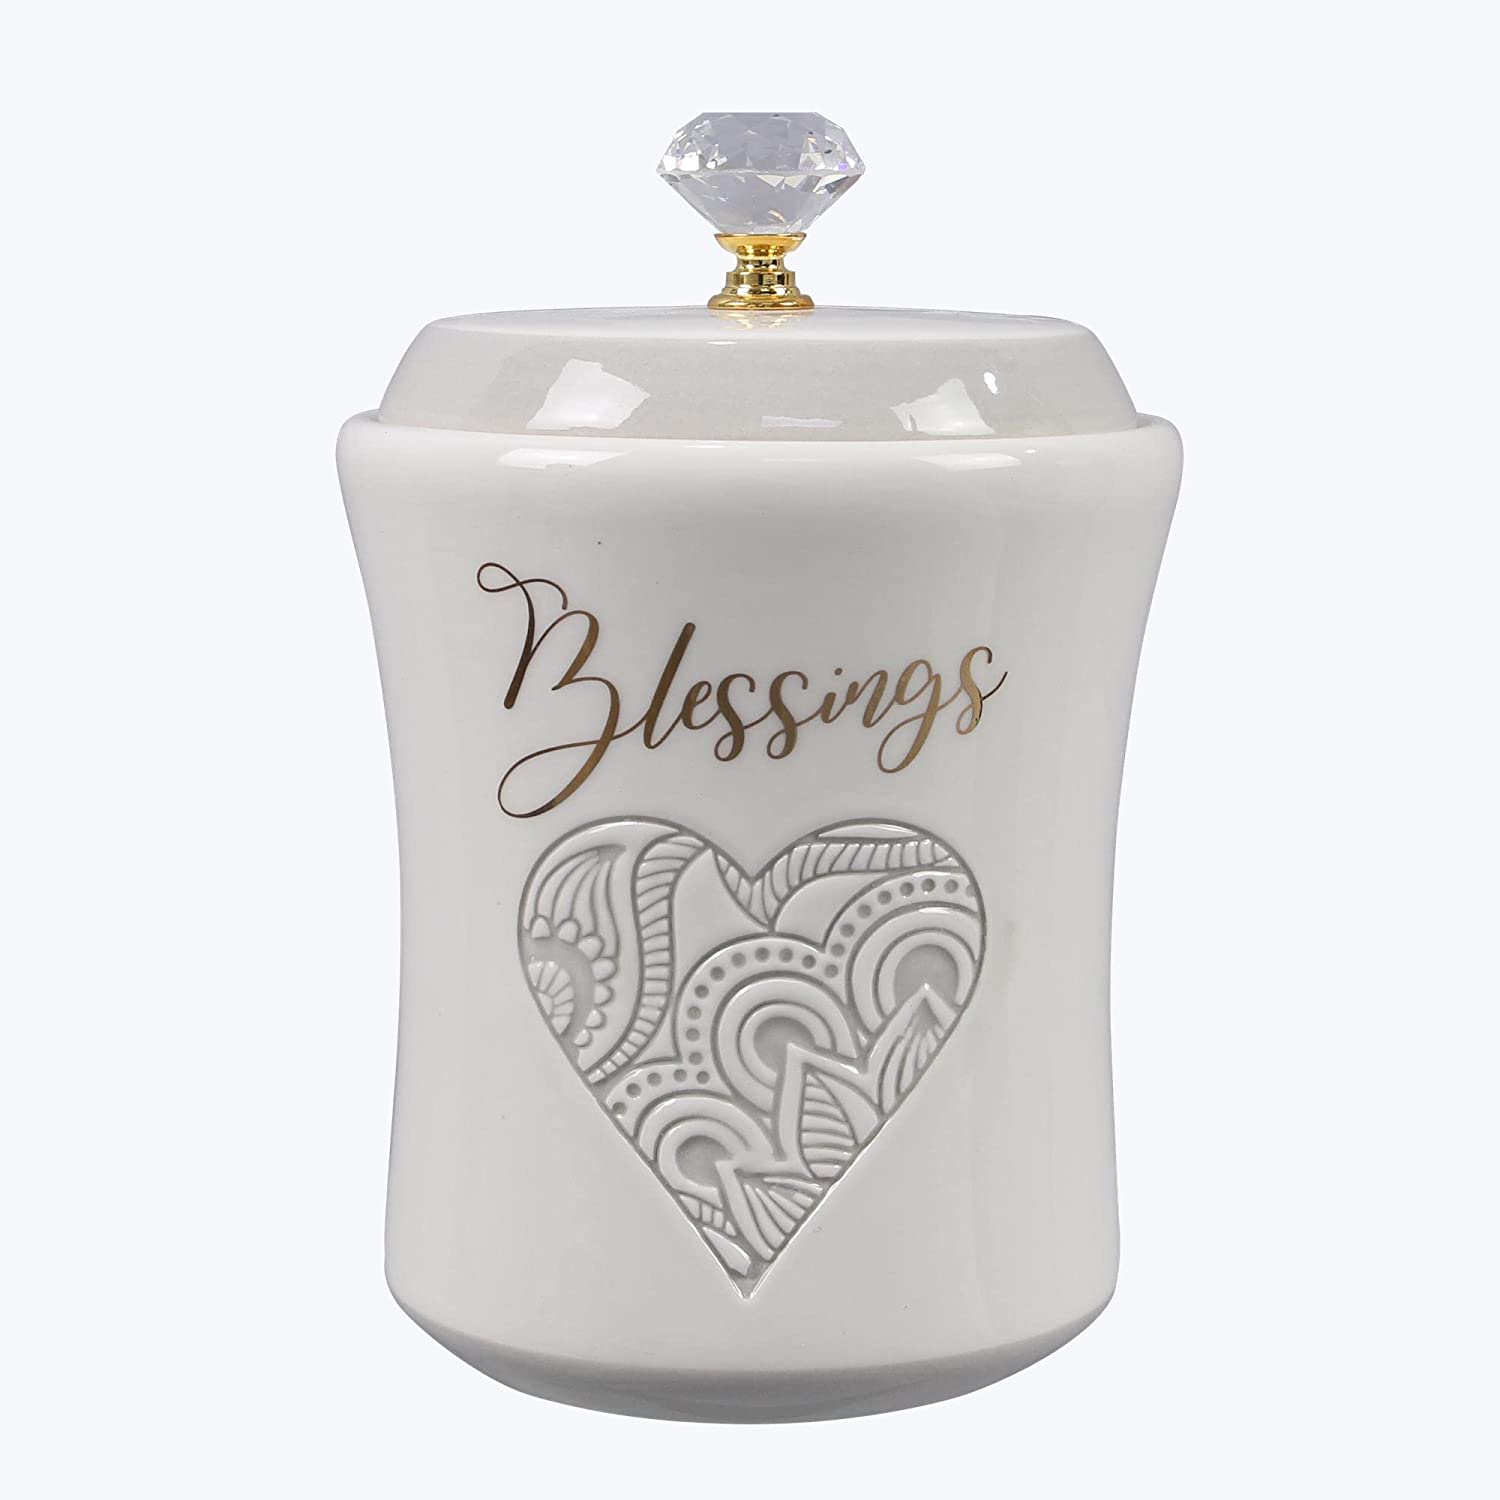 Wedding Blessing Jar, 40 Best Wishes Cards in Organza Bag